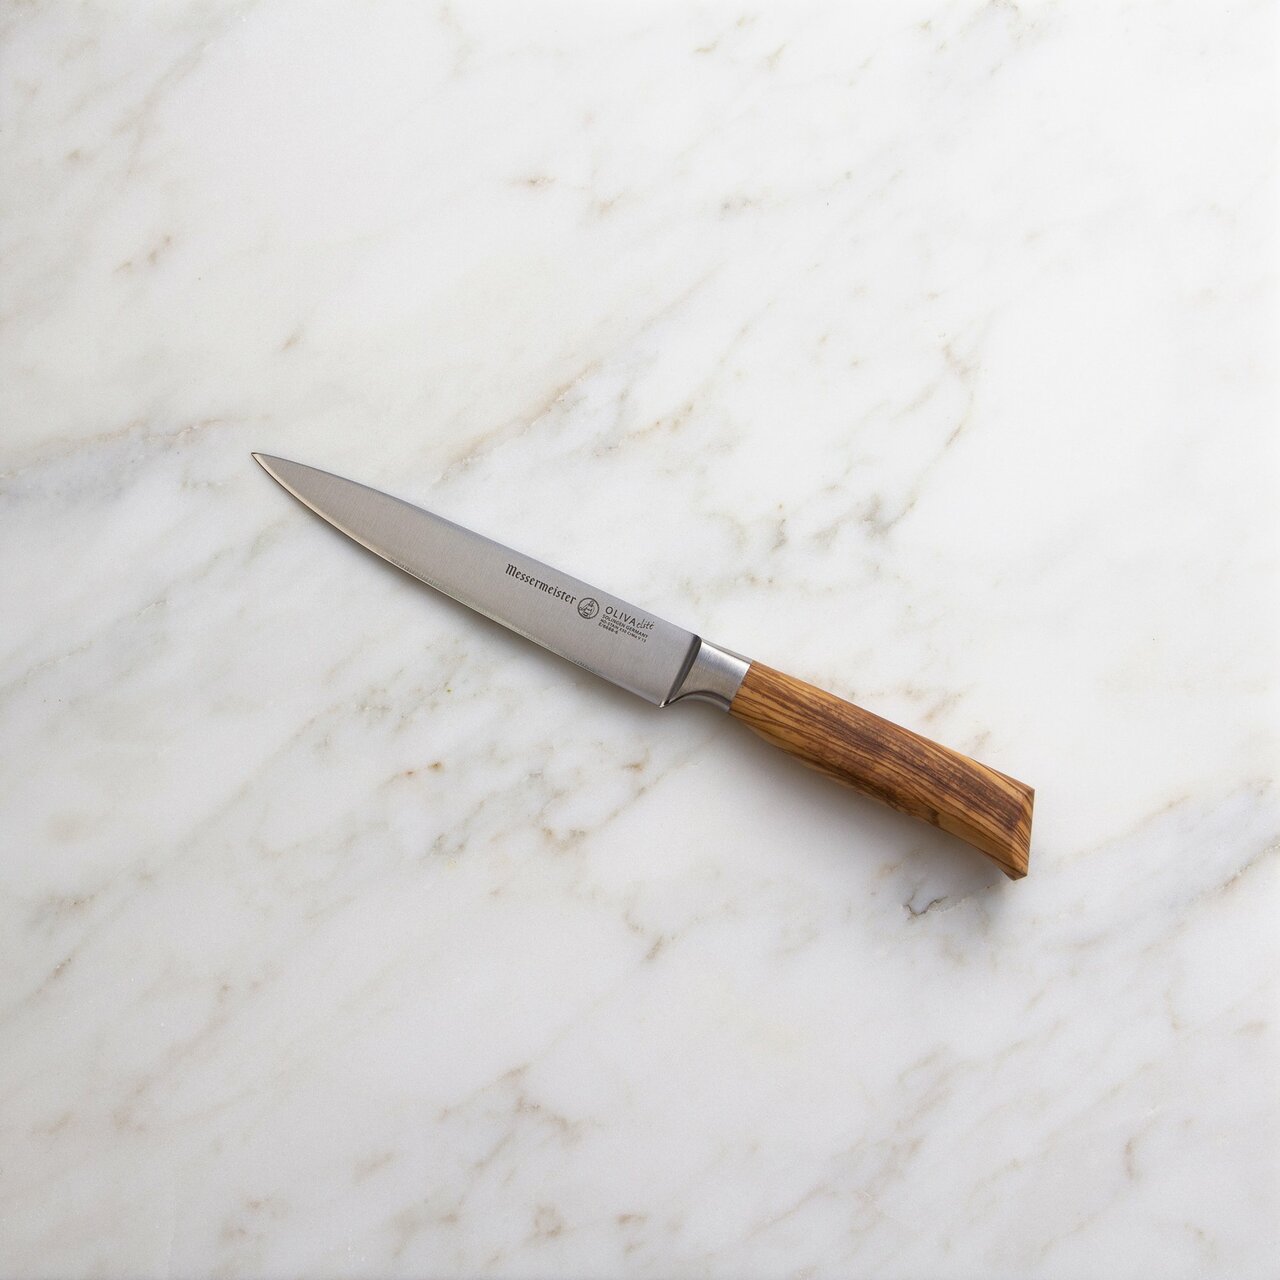 BEON.COM.AU E6688 6         Oliva Elite 6 Inch Utility Knife You will find yourself using the Messermeister Oliva Elite 6 Inch Utility Knife for all of your go-to tasks in the kitchen. With it’s fine edge, this traditional style utility knife is one of the most frequently used knives in the kitchen and a fav... Messermeister at BEON.COM.AU